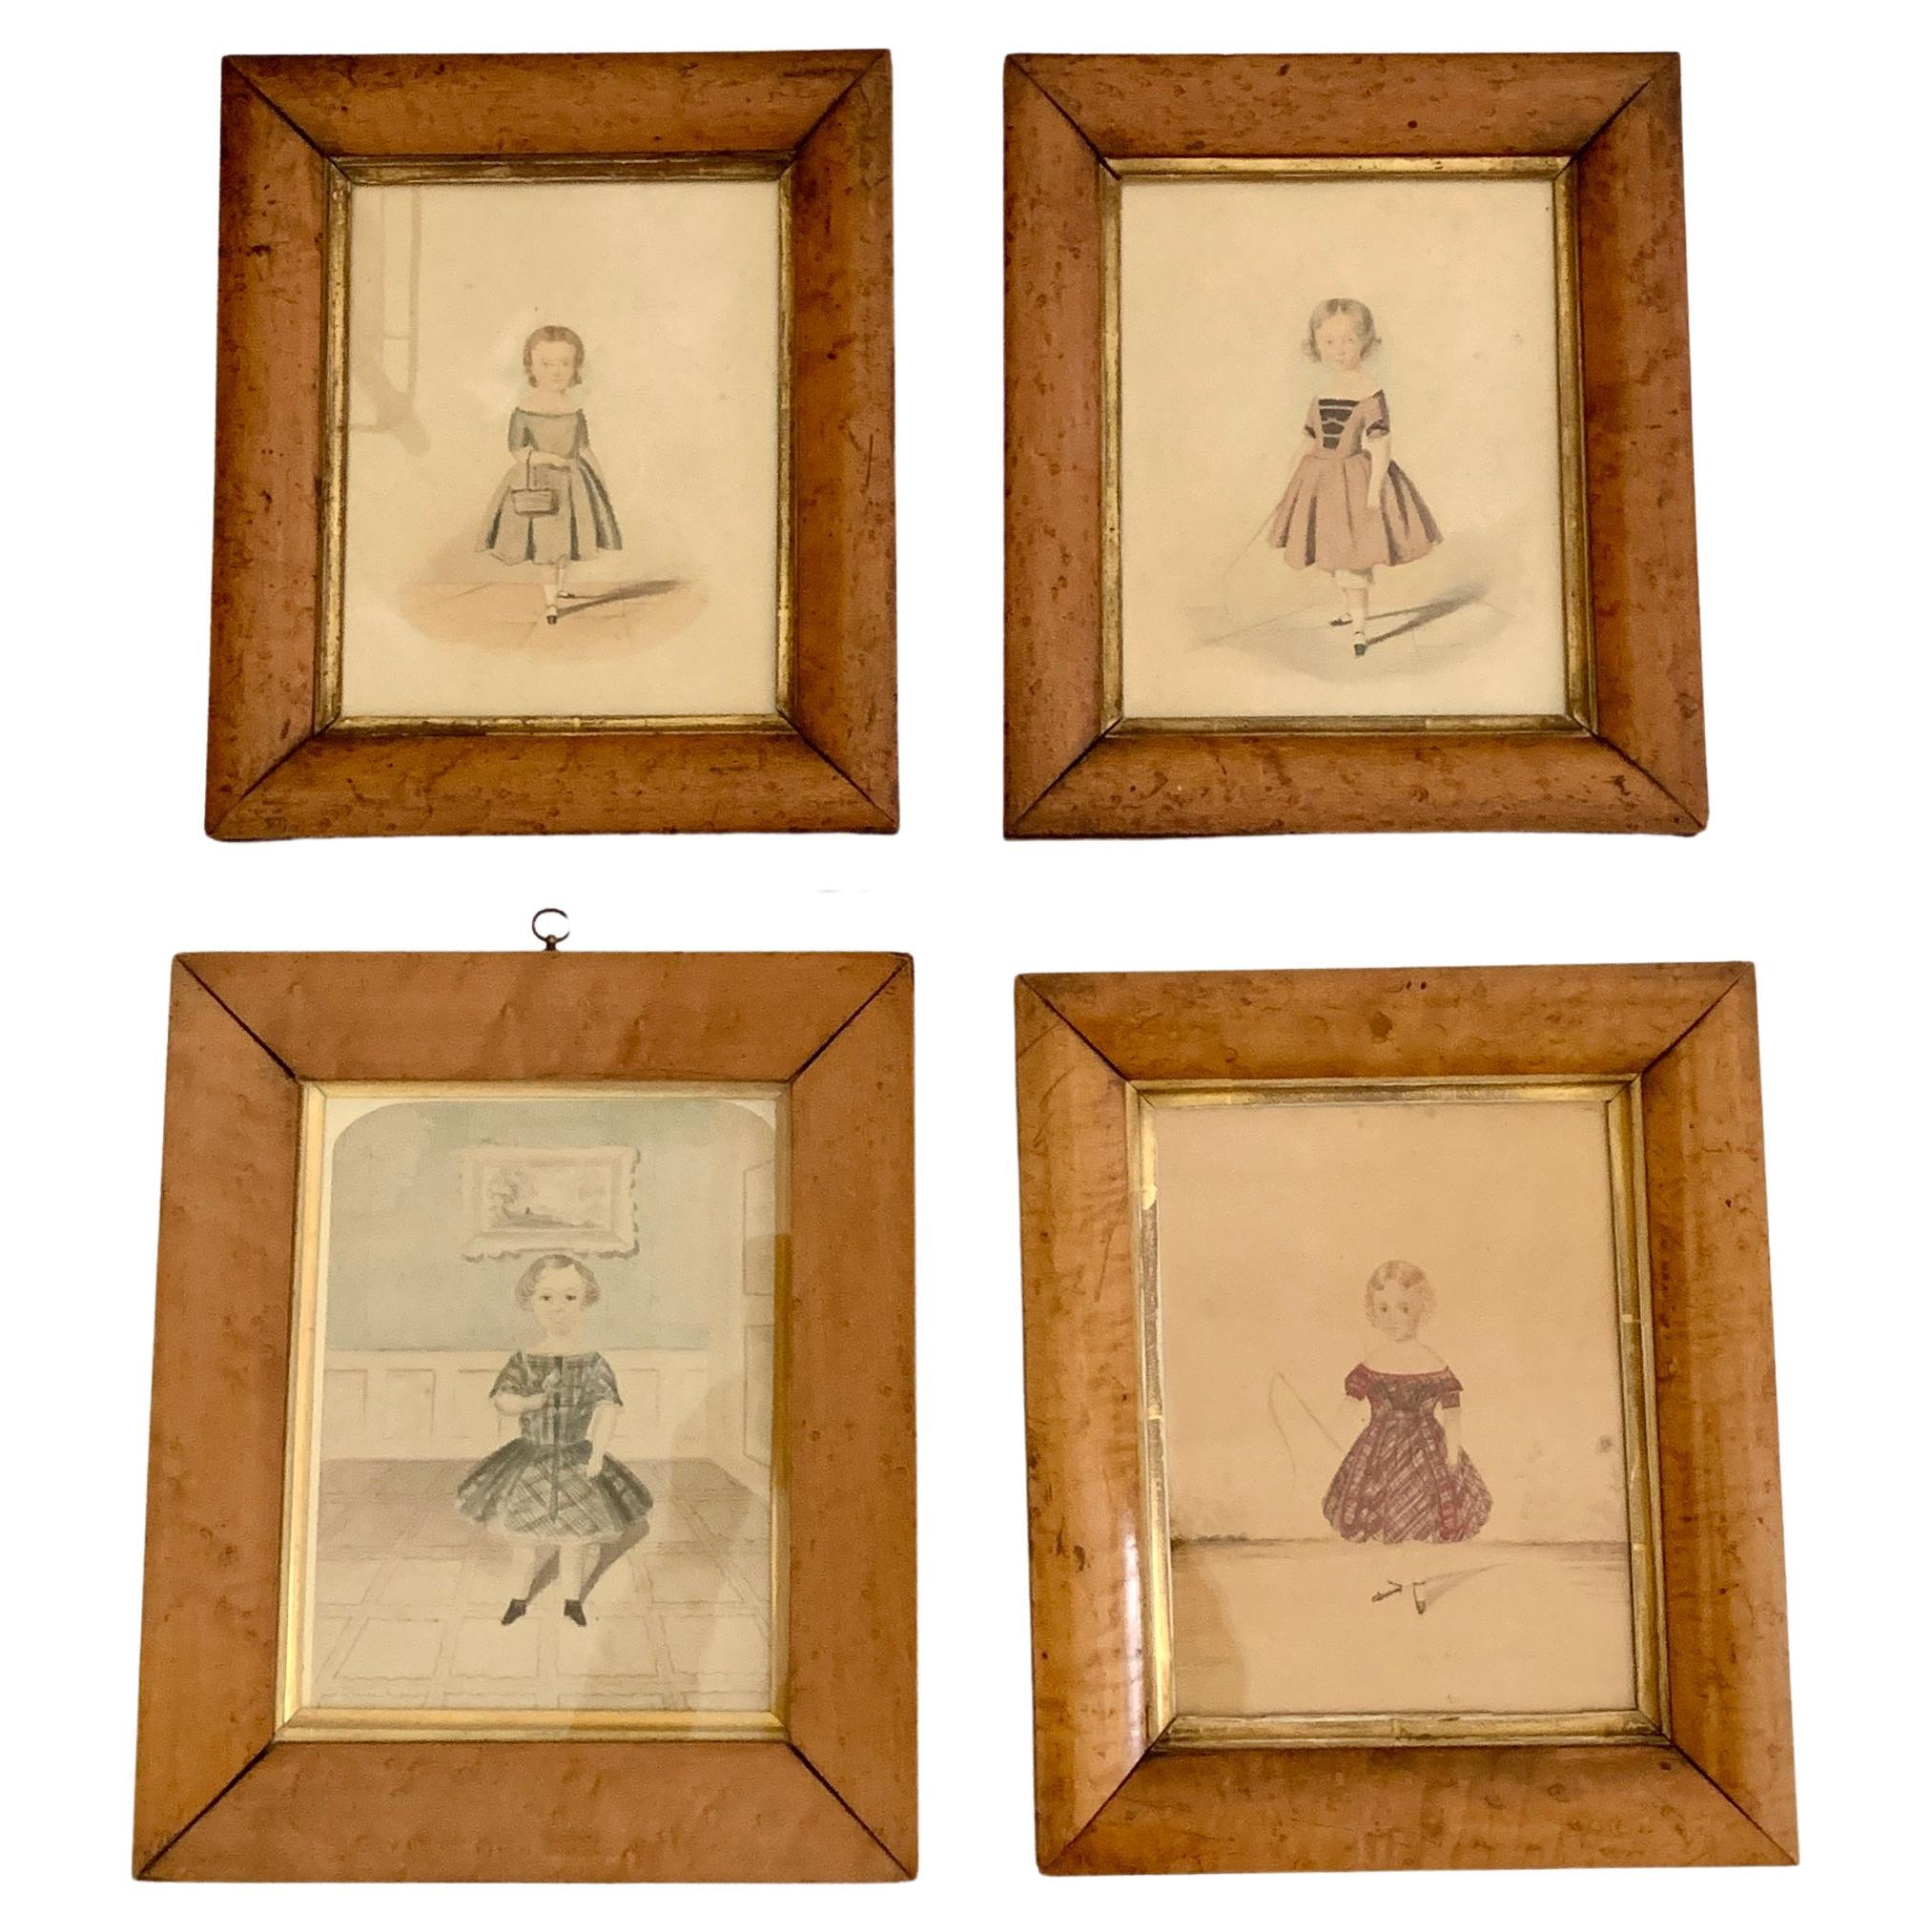 4 Portrait Paintings of Little Girls Circa 1840 England Before Photography